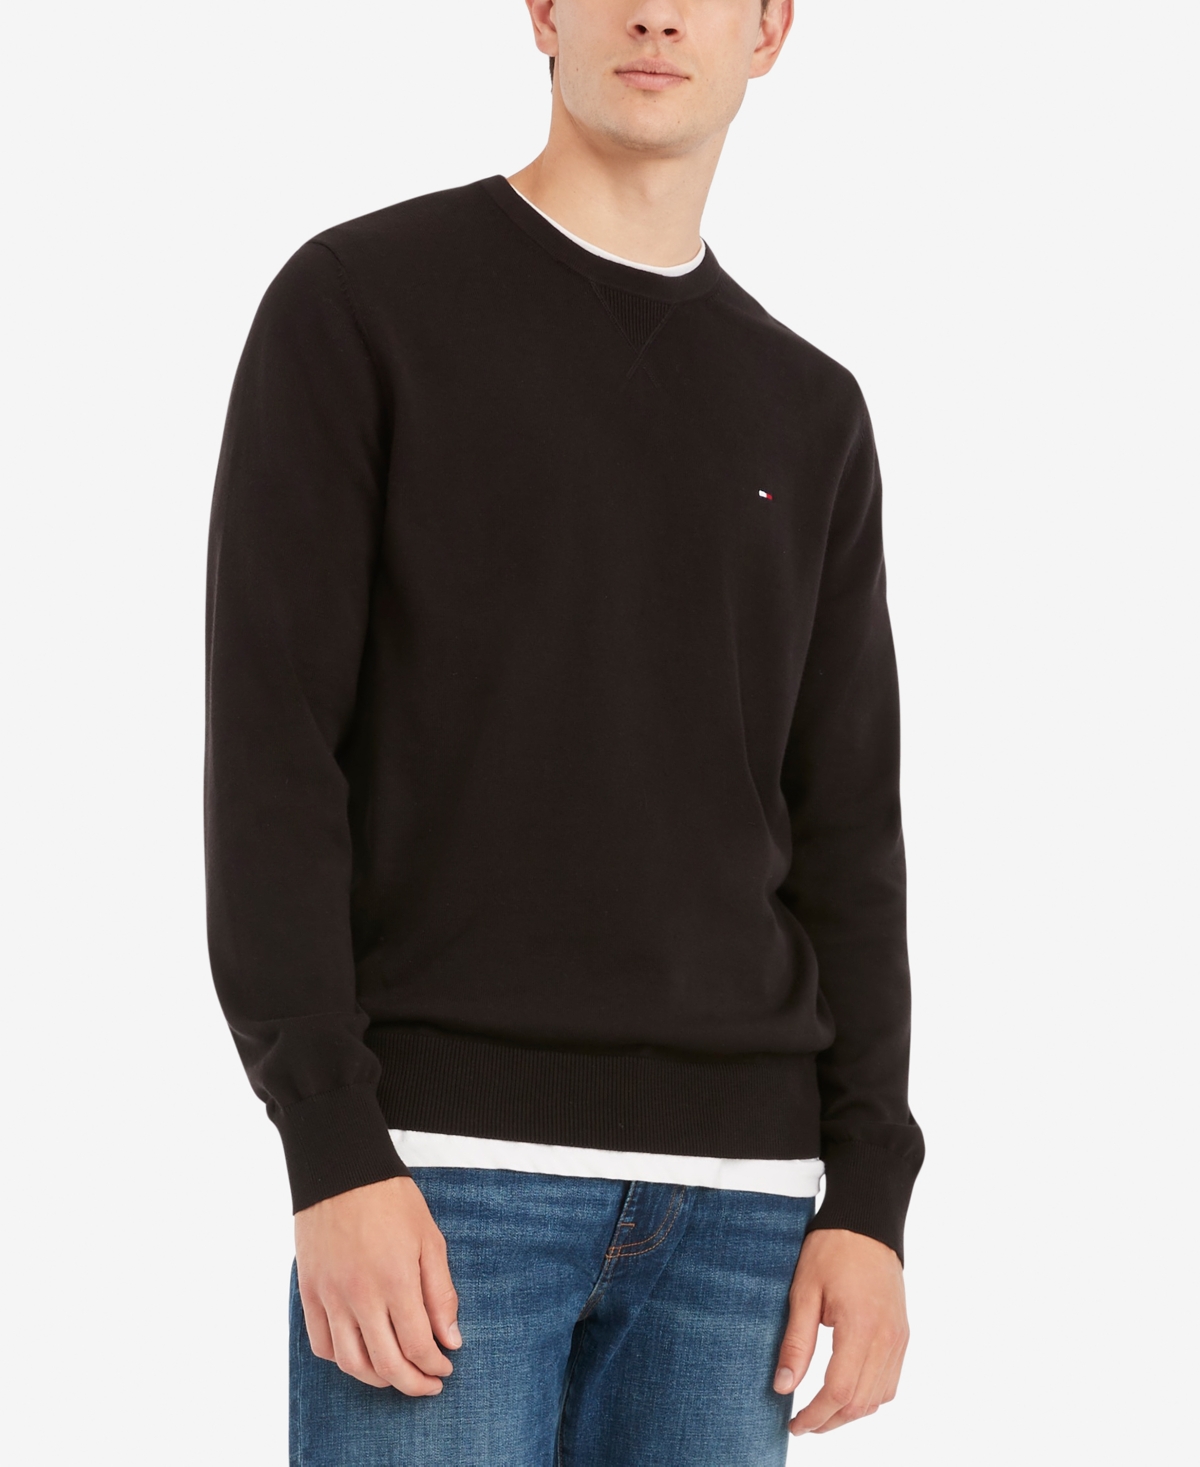 Tommy Hilfiger Men's Signature Solid Crew Neck Sweater Black Size Small